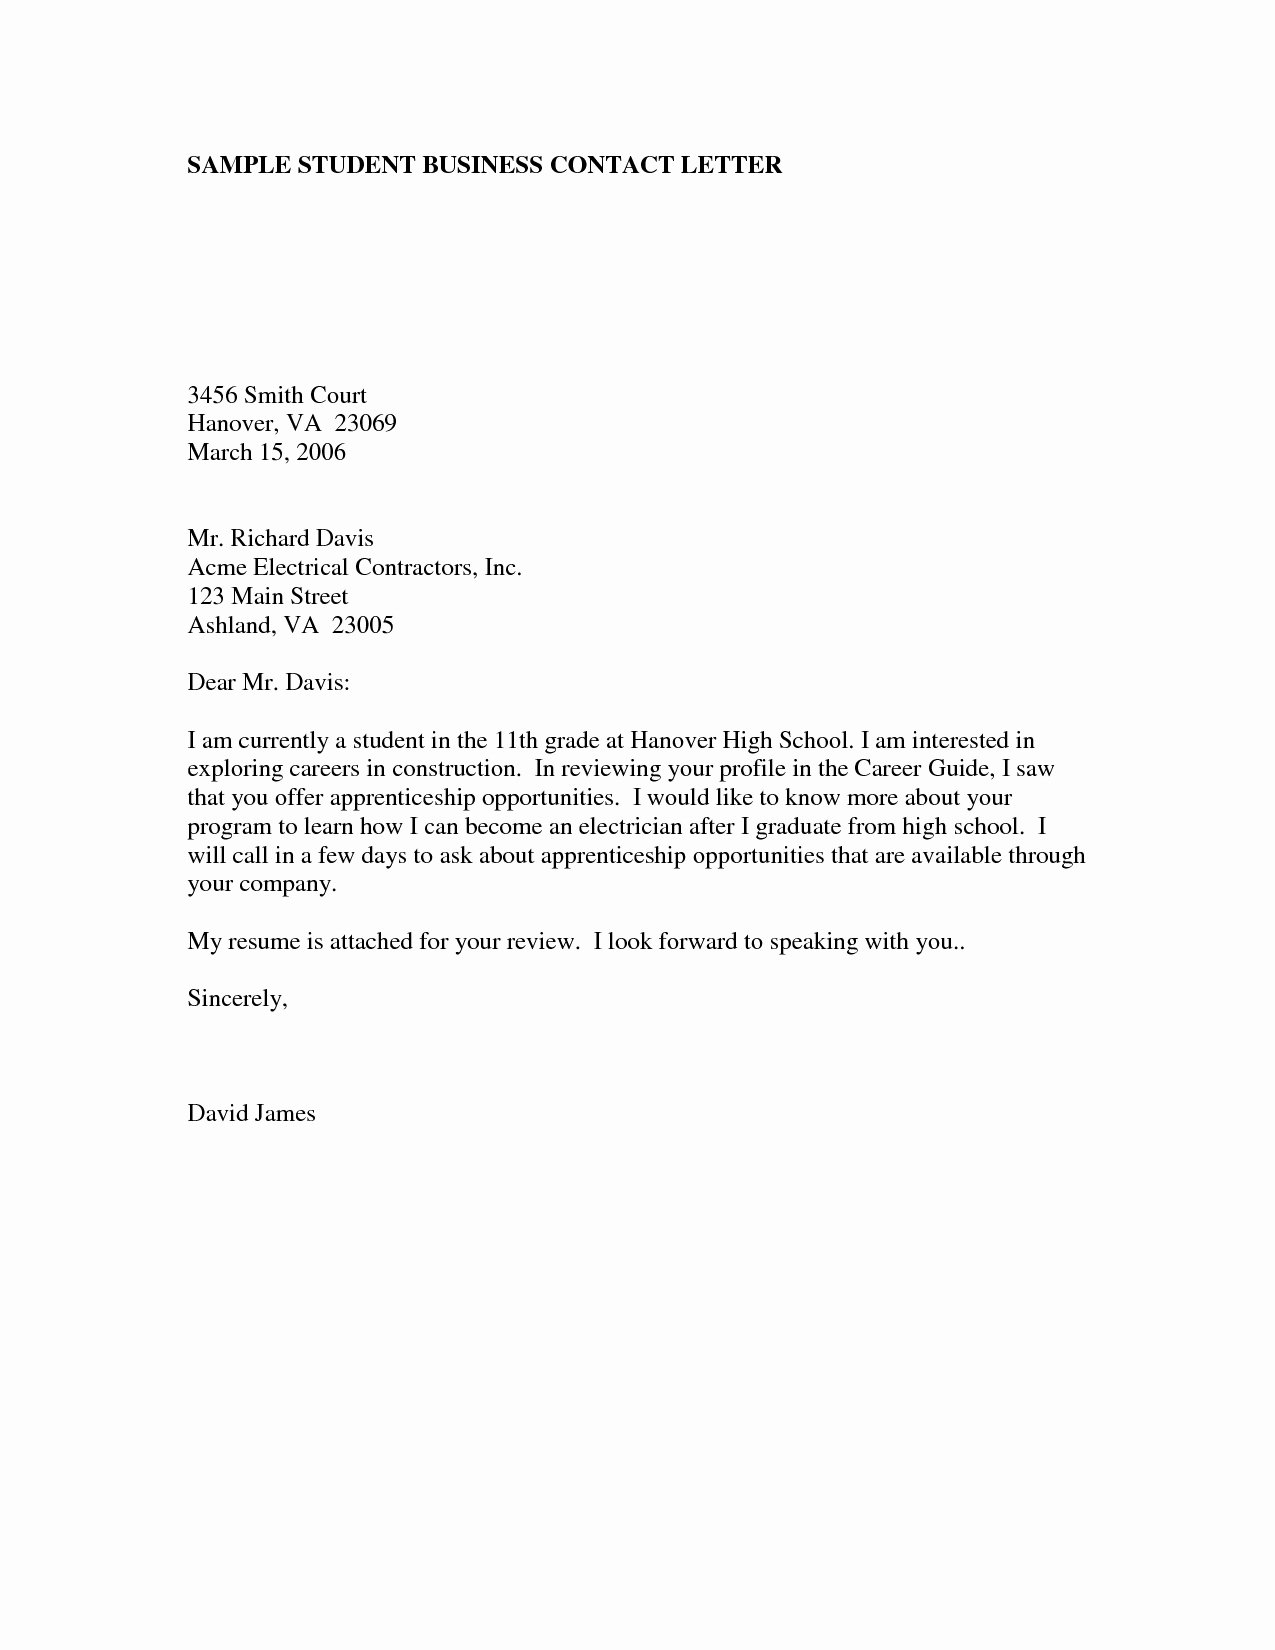 Letter format for Kids Inspirational Example Business Letter for Students